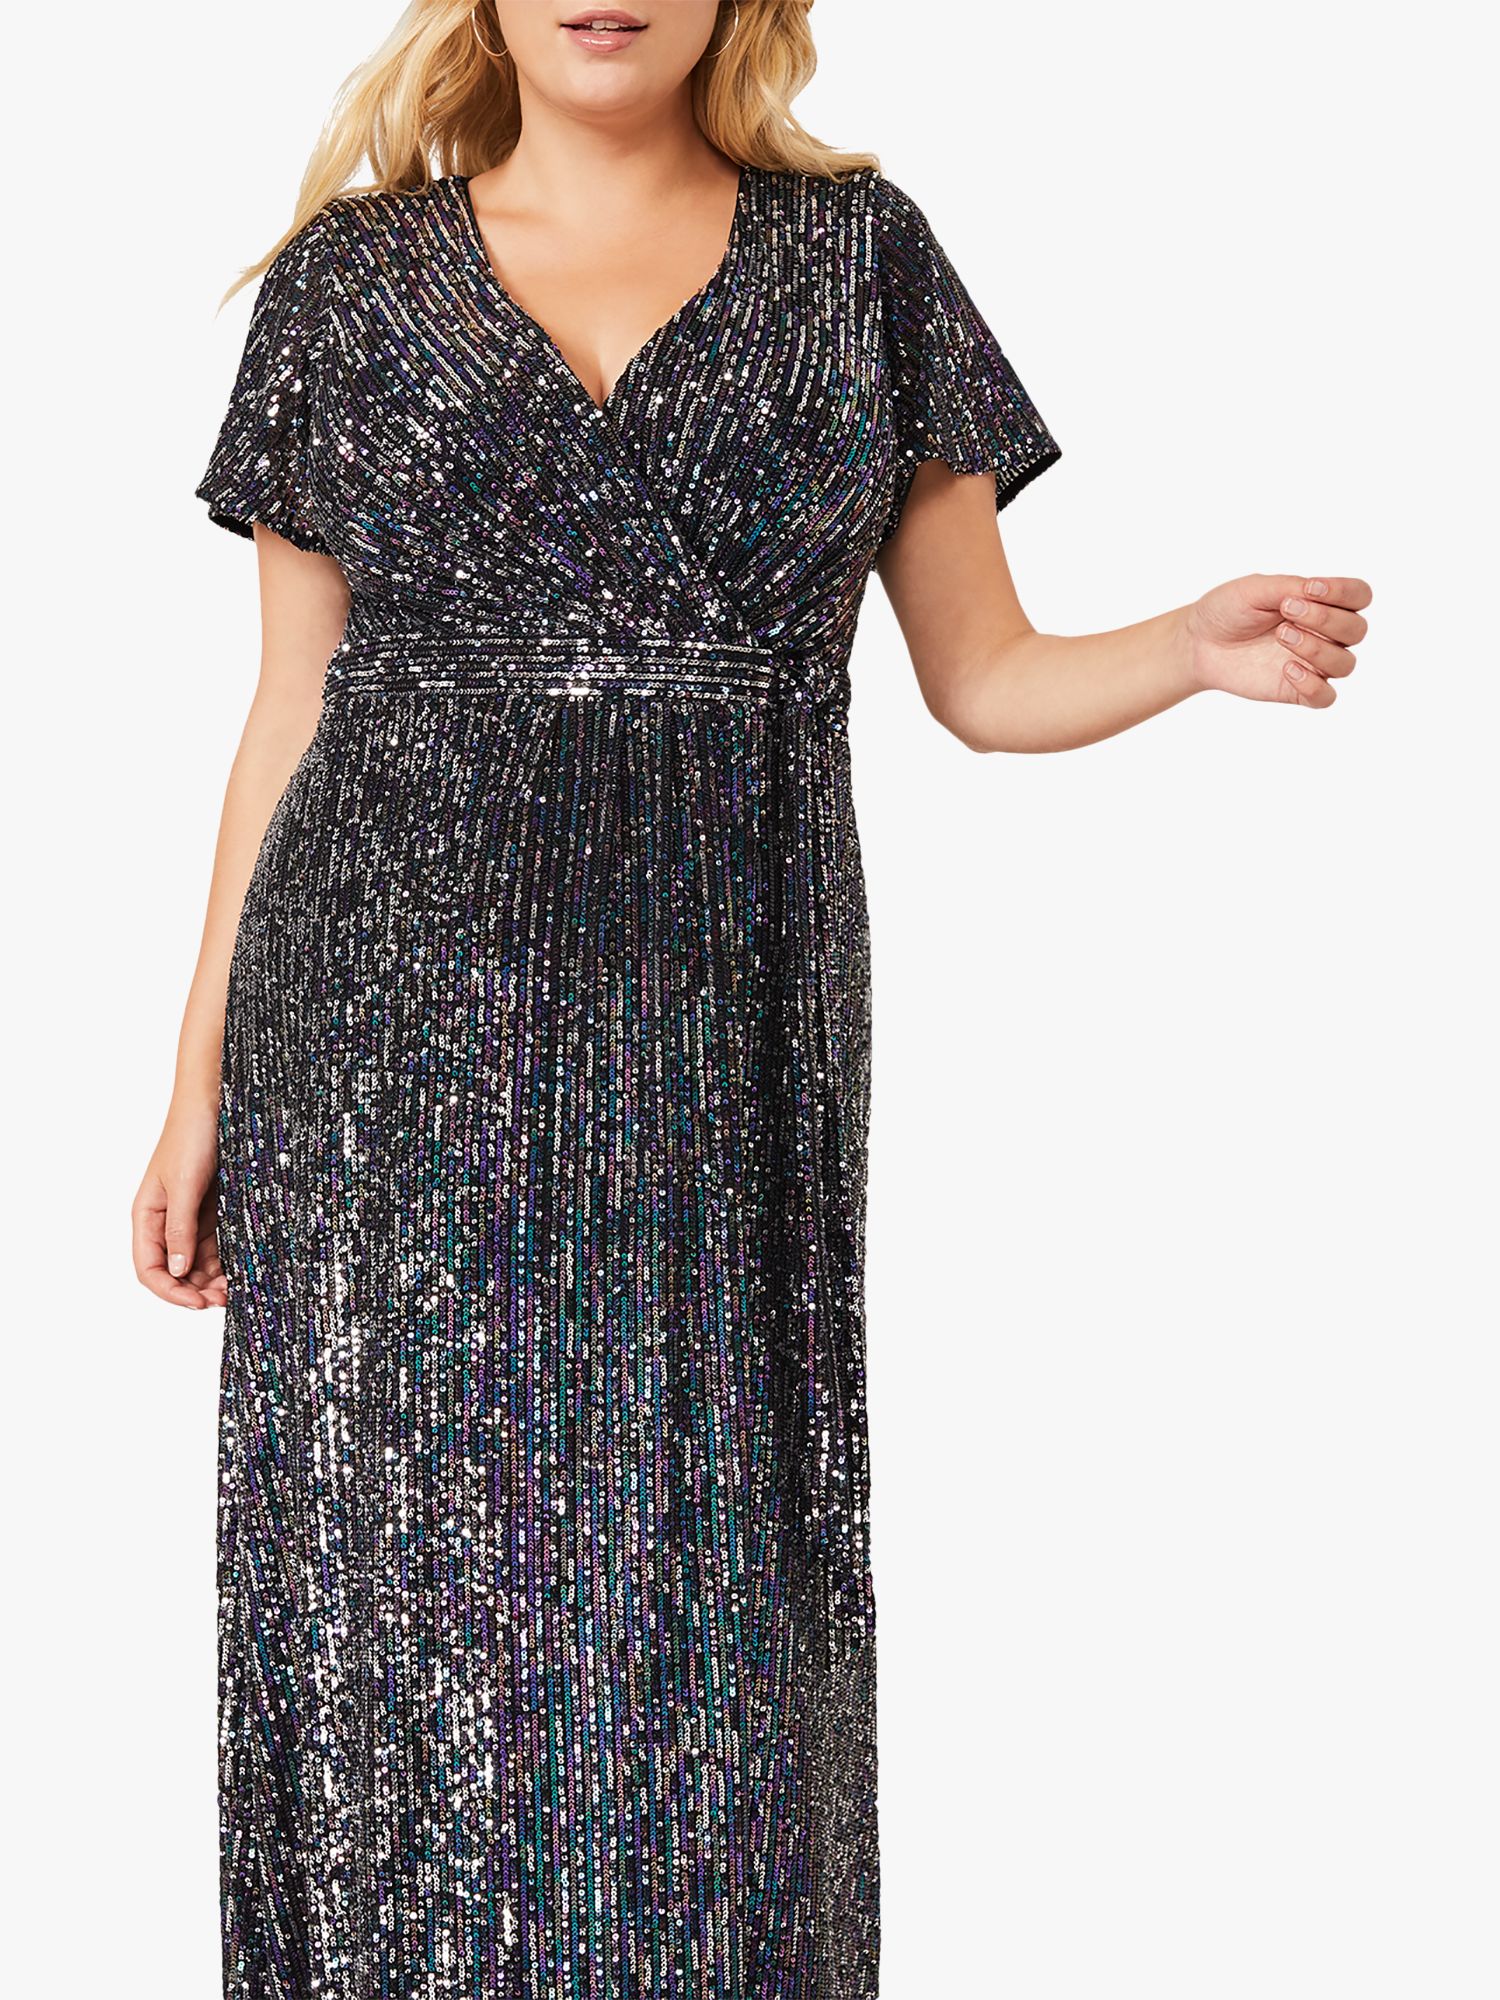 Studio 8 Amily Sequin Embellished Maxi Wrap Dress, Charcoal at John Lewis & Partners